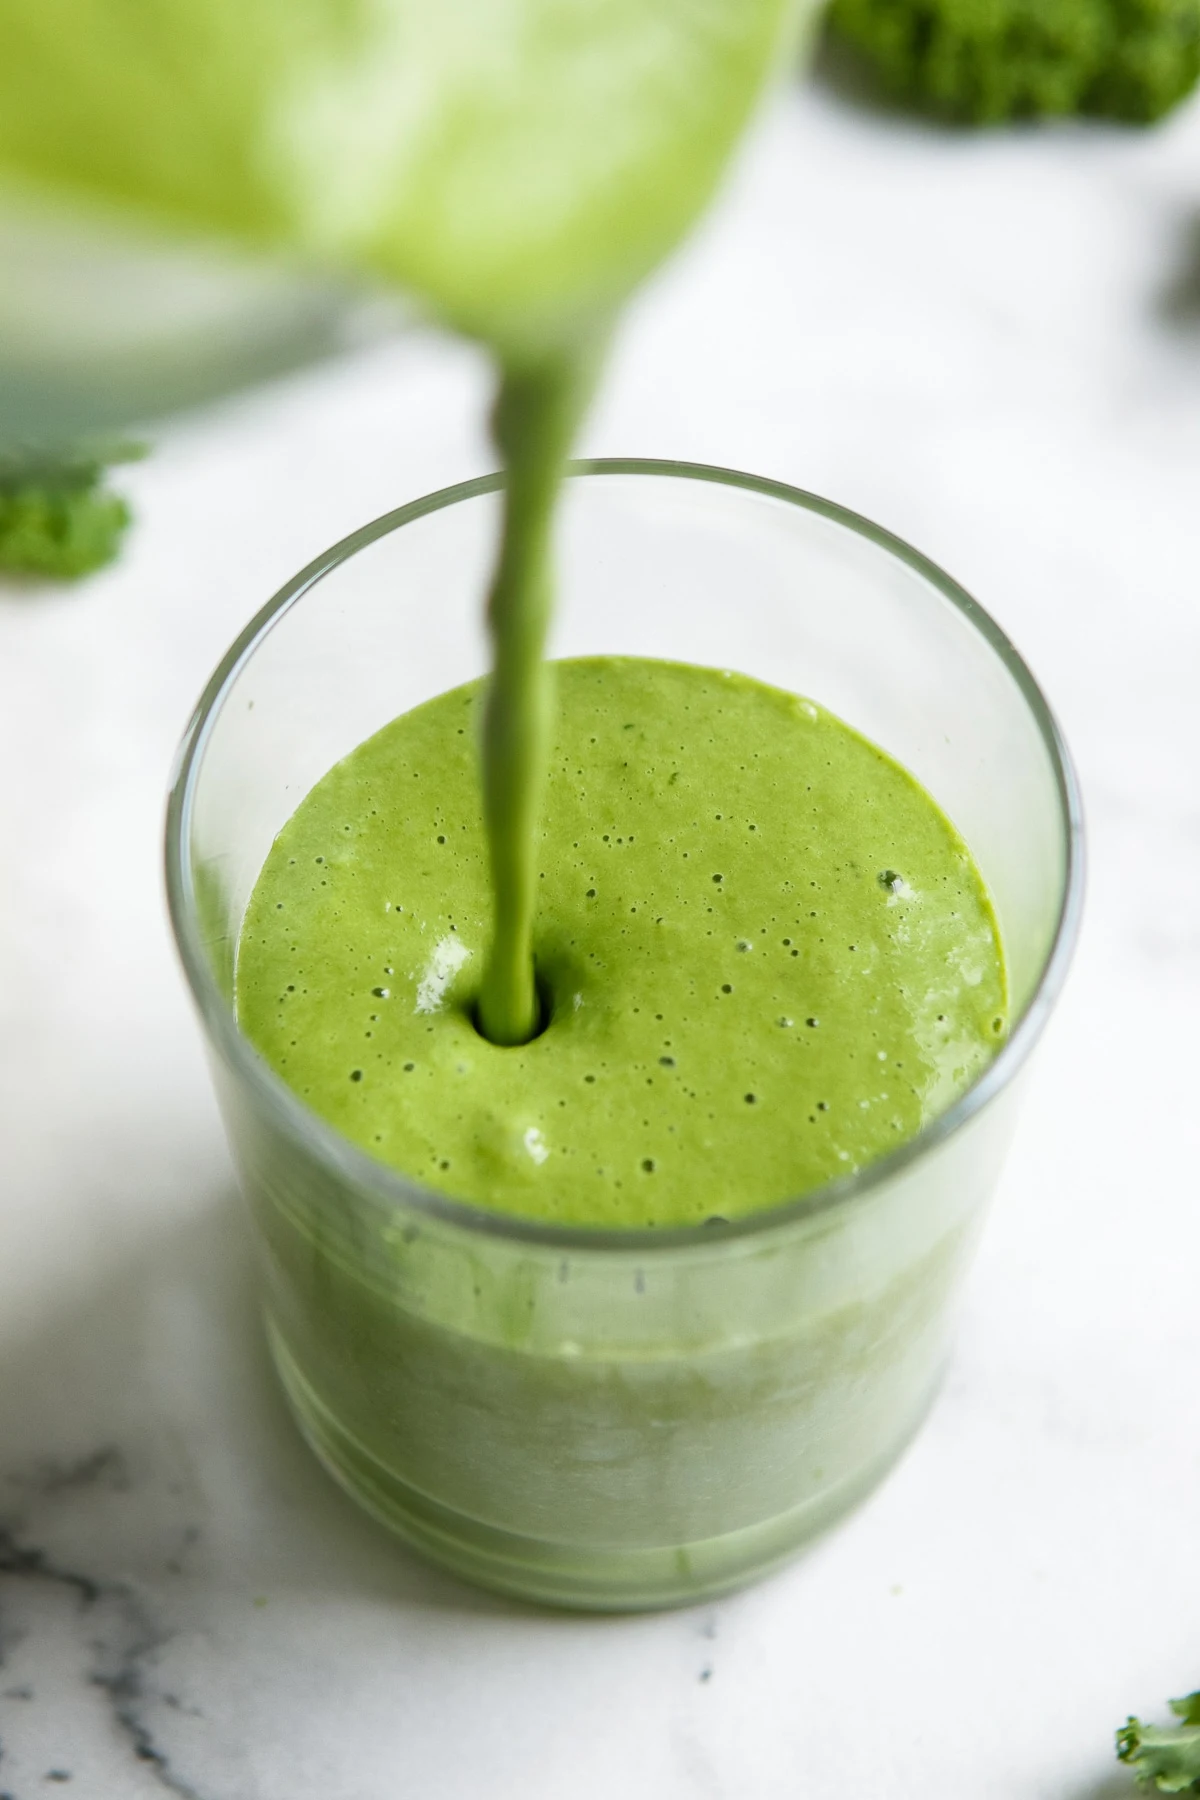 Kale smoothie being poured into a glass.